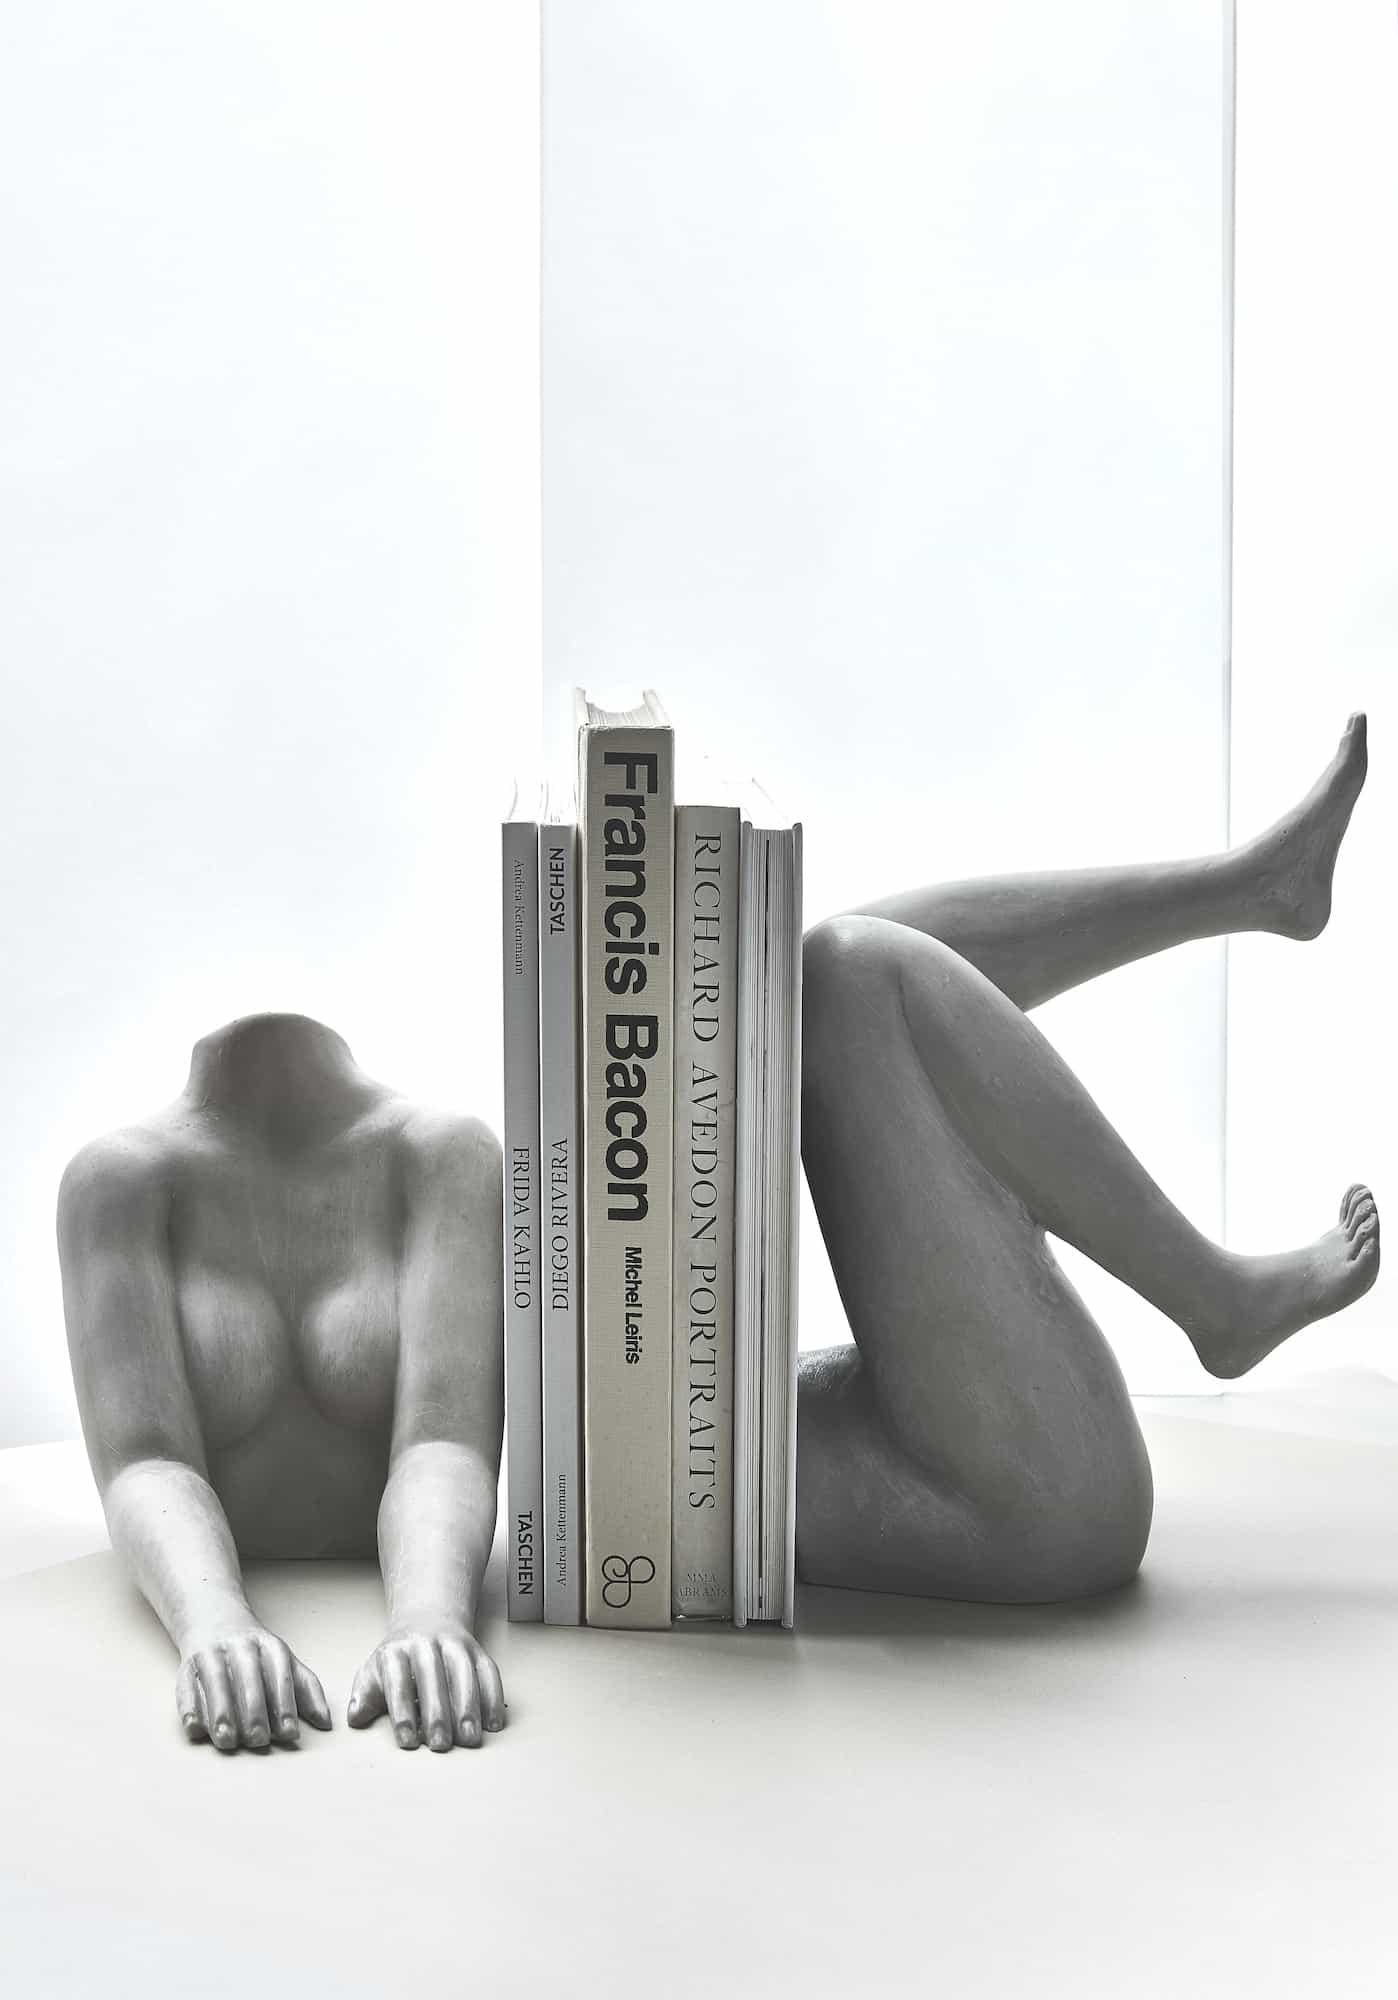 Il Corpo Bookends by Marcela Cure
Dimensions: Upper W 19 x D 16.5 x H 31 cm / Lower W 22 x D 18 x H 31 cm
Materials: Resin and Stone Composite

Our Il Corpo sculpture is a set of two individual sculptures portraying the upper and lower body